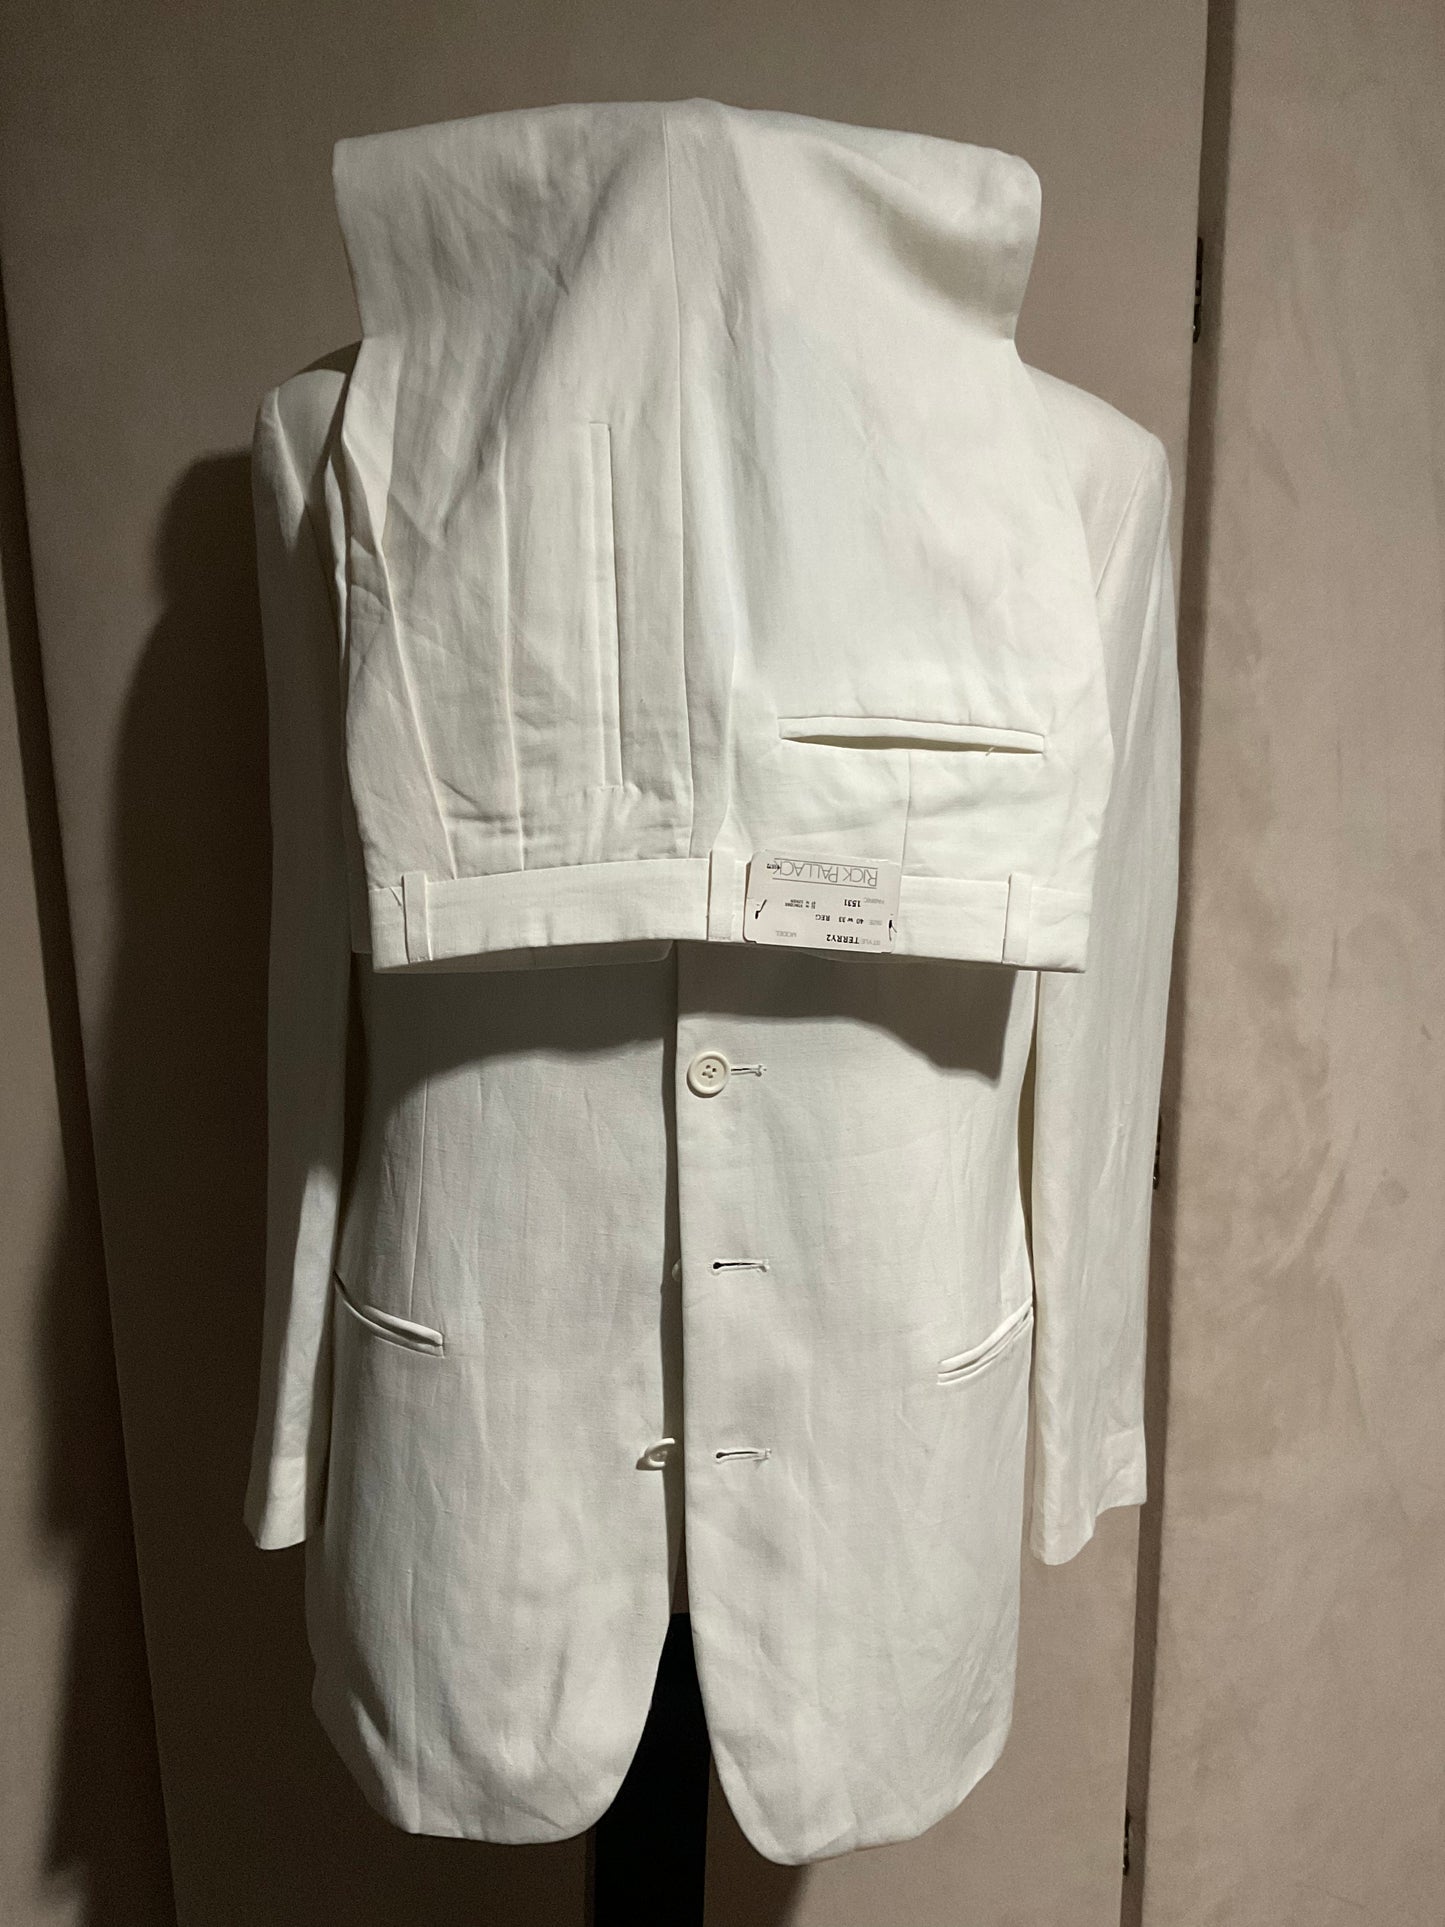 R P SUIT / WHITE LINEN / 40 REG / 4 BUTTON / NEW / MADE IN CANADA